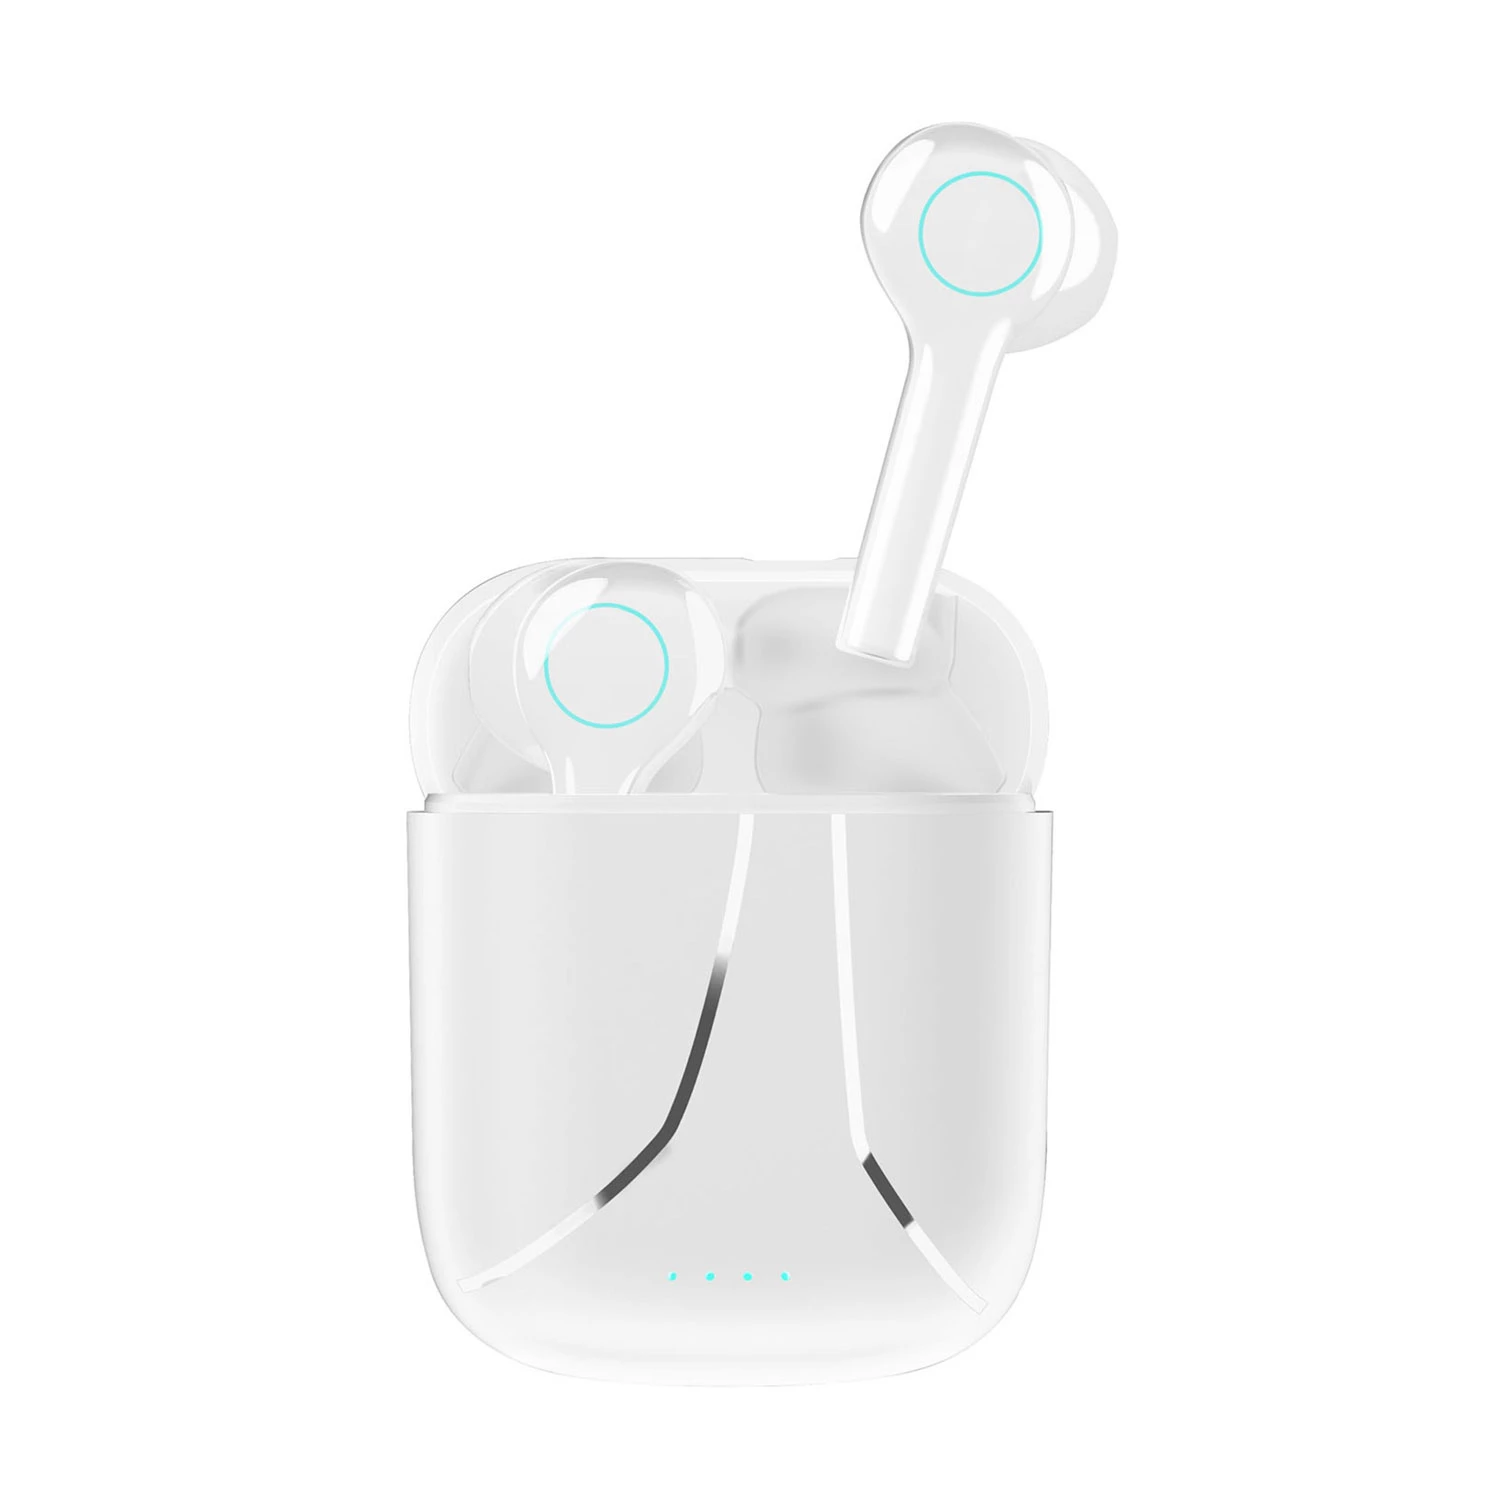 Waterproof Wireless 5.0 TWS Earbuds - 30Hrs Playtime - Magnetic Charging Case - Mic - Sport Running